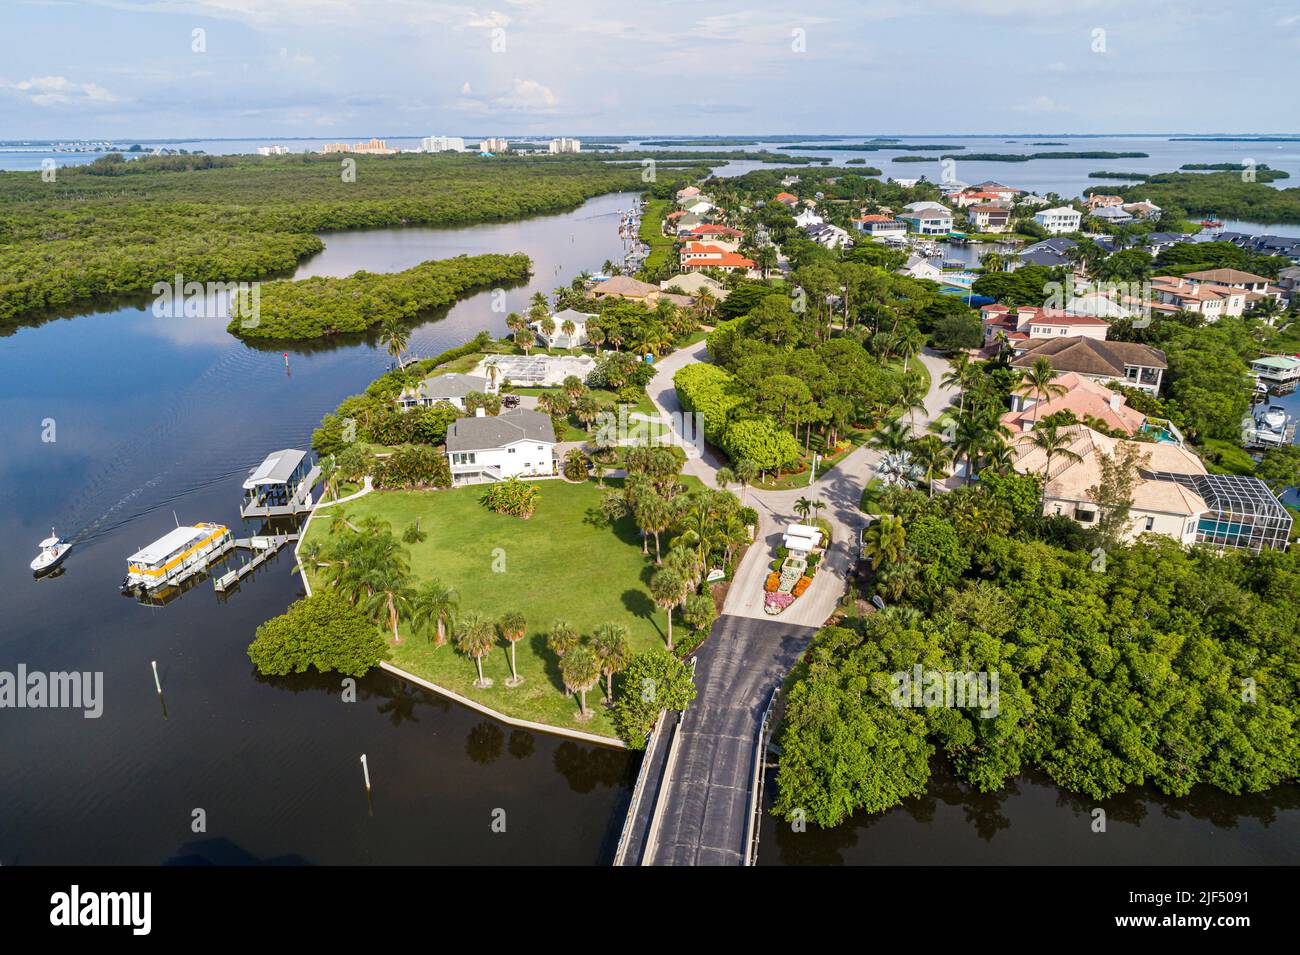 Fort Ft. Myers Florida,Connie Mack Island gated private community houses homes development encroachment,wetlands Punta Rassa Cove Gulf of Mexico,aeria Stock Photo